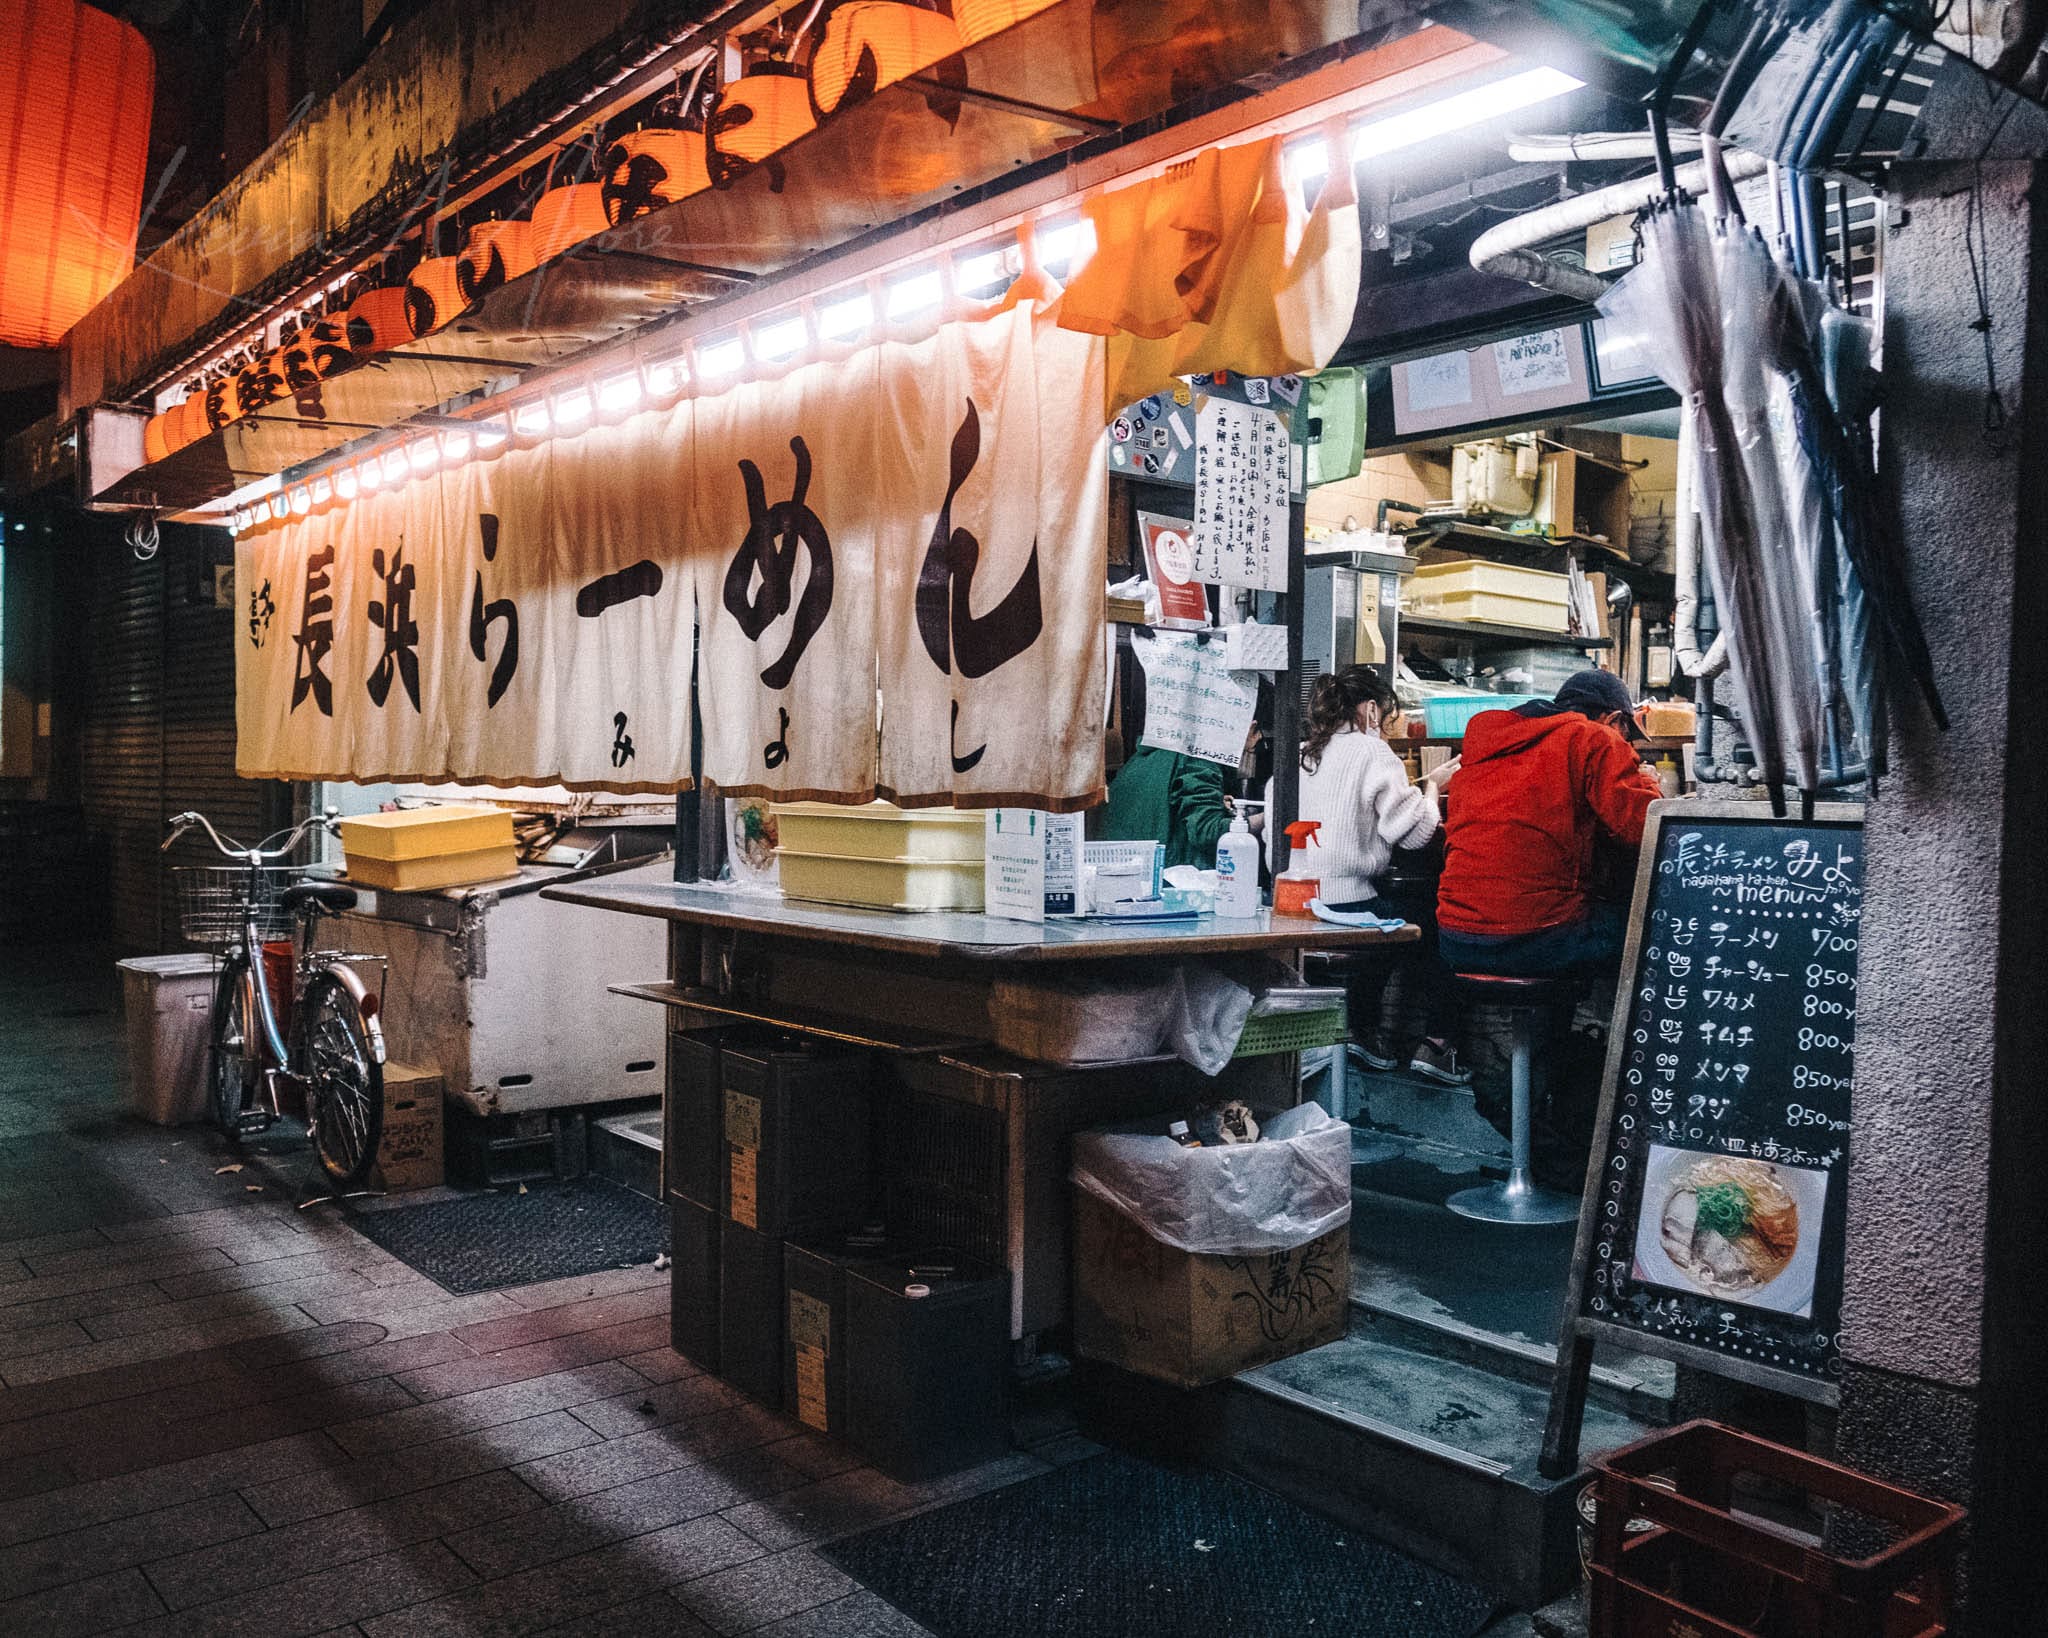 Vibrant night scene at an urban Kyoto ramen stall, packed with cooking tools and a bicycle.